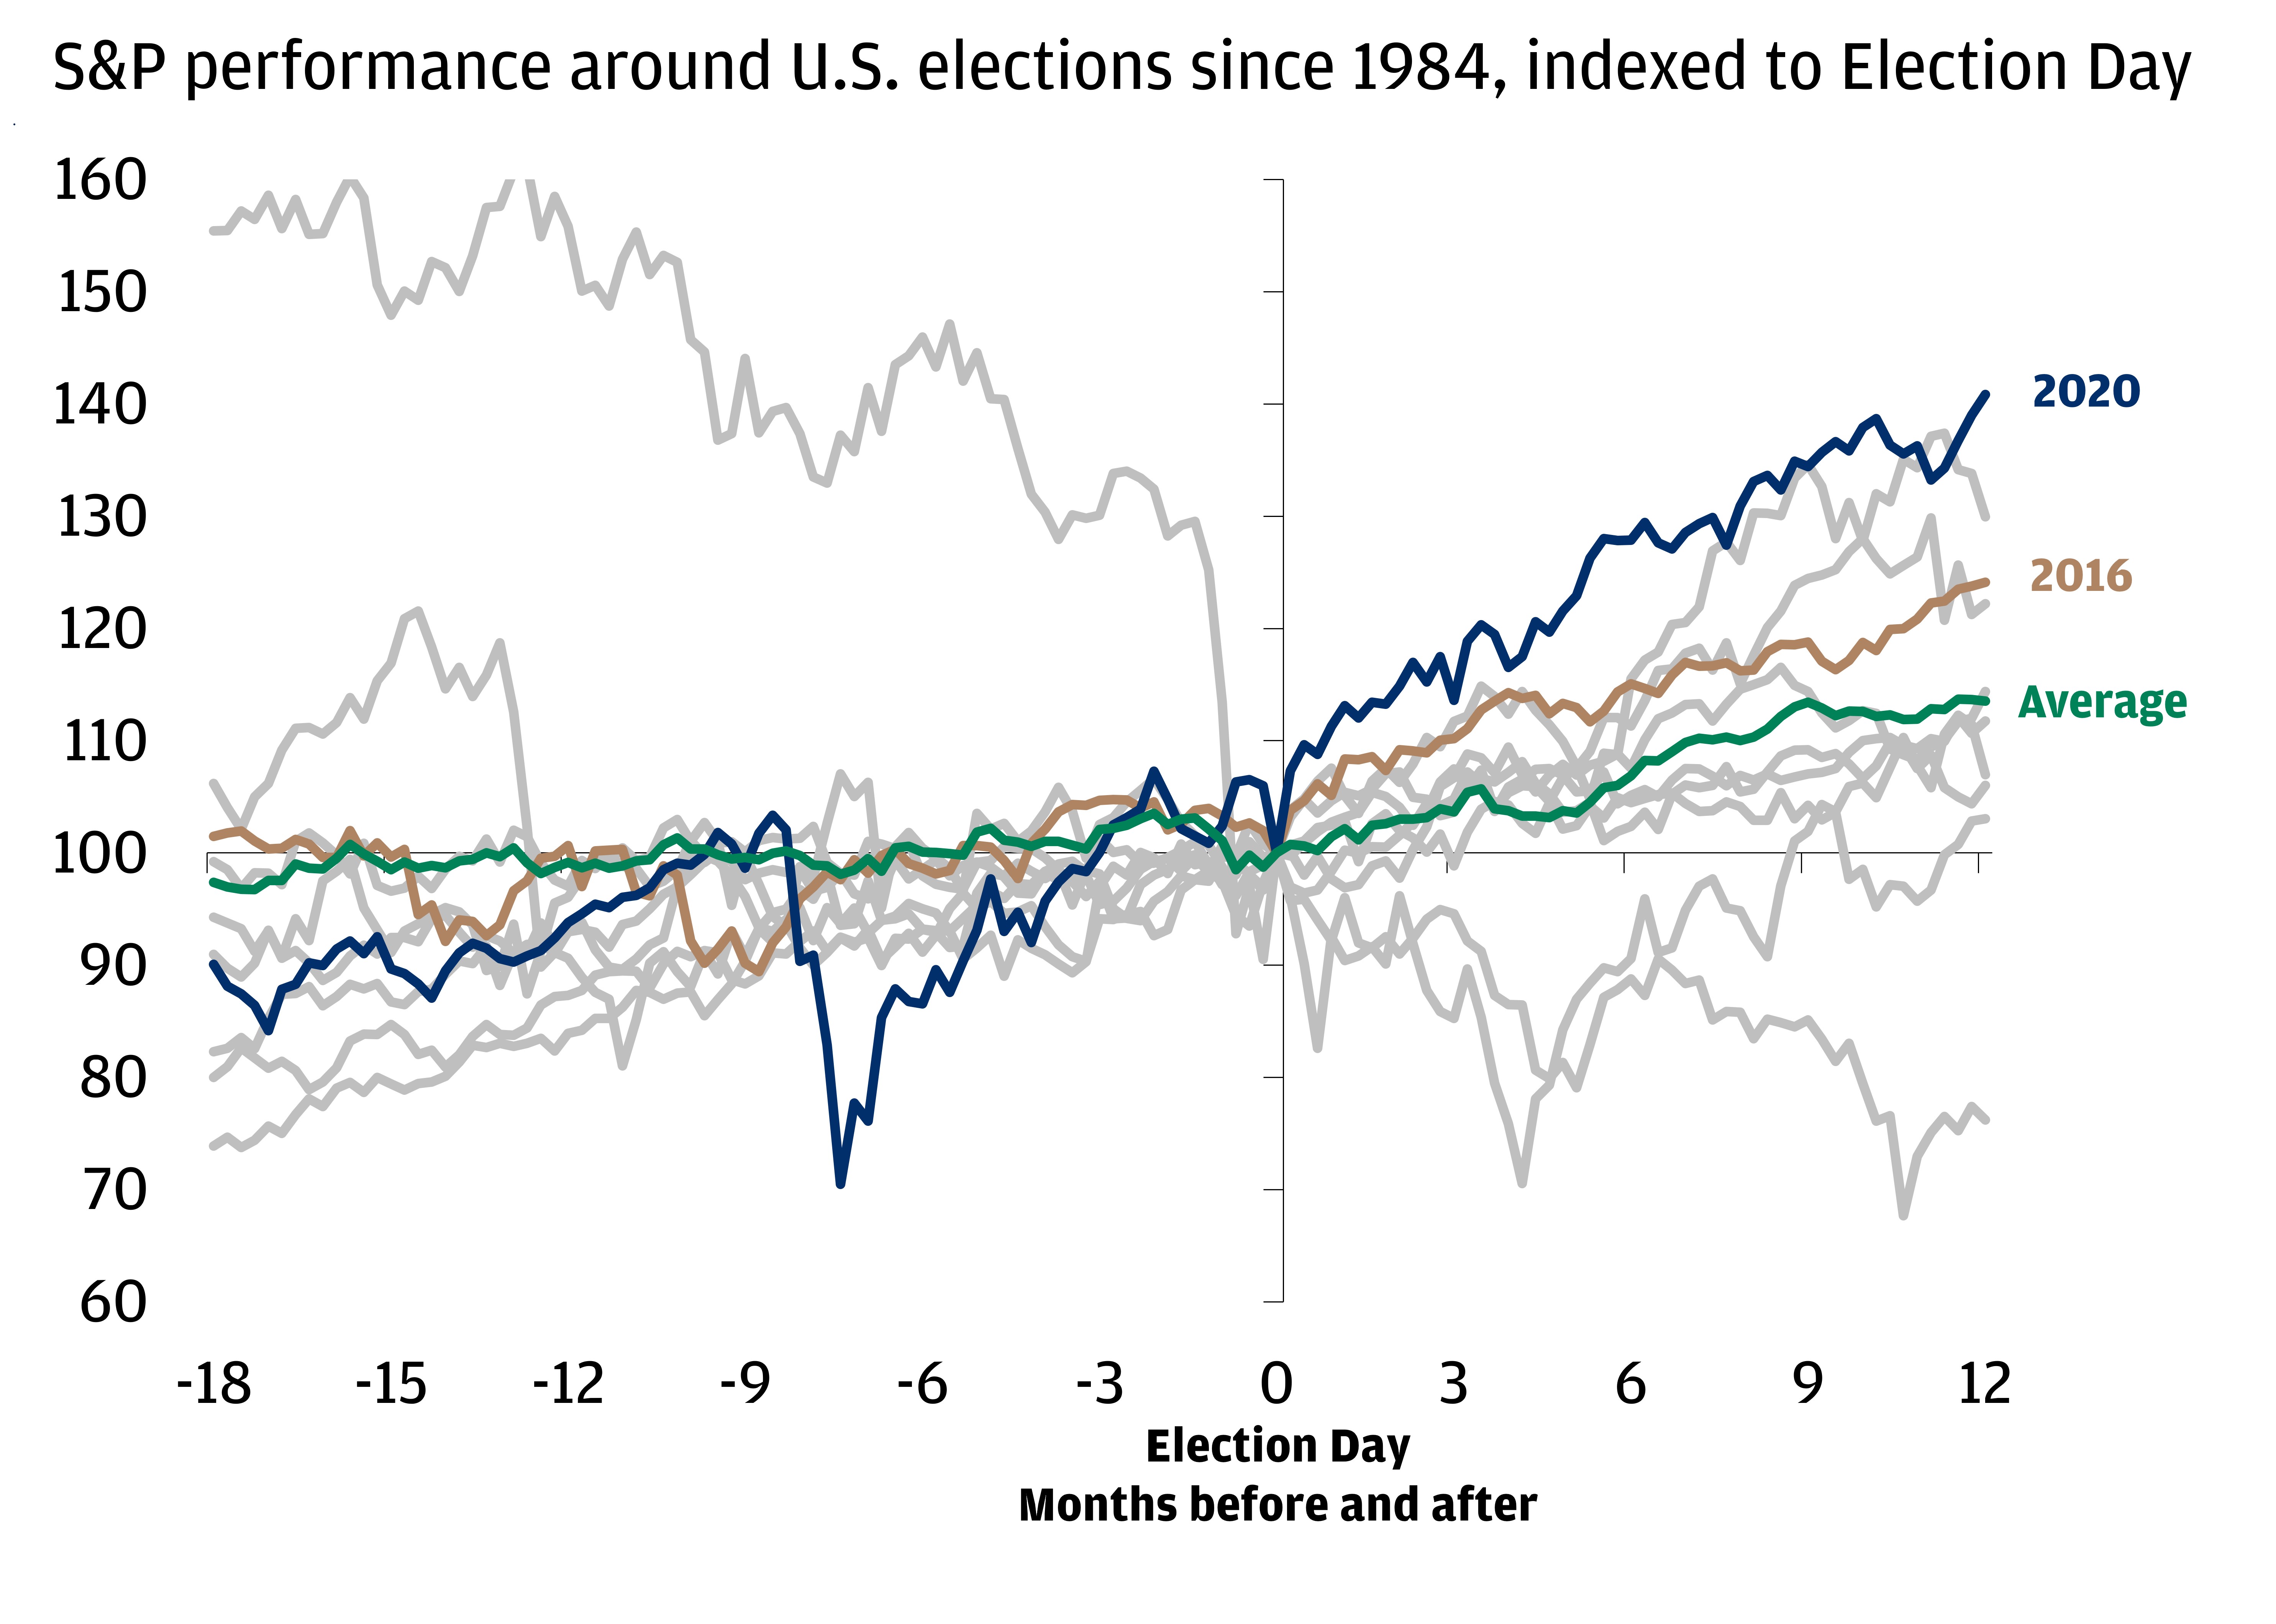 This chart shows the S&P 500 performance around U.S. elections since 1980, indexed to Election Day.